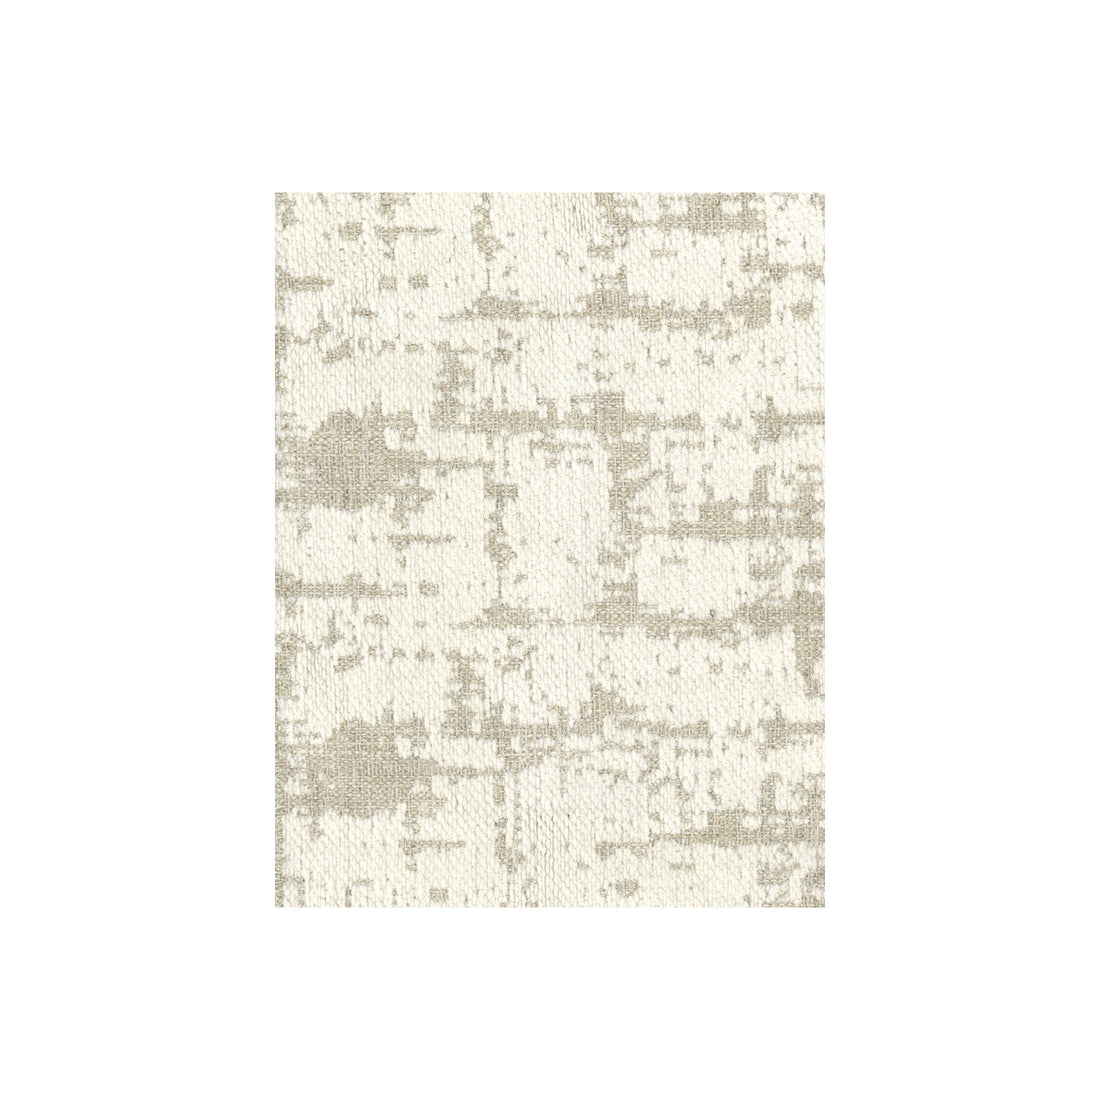 Walmer fabric in ivory color - pattern AM100255.1.0 - by Kravet Couture in the Andrew Martin Clarendon collection